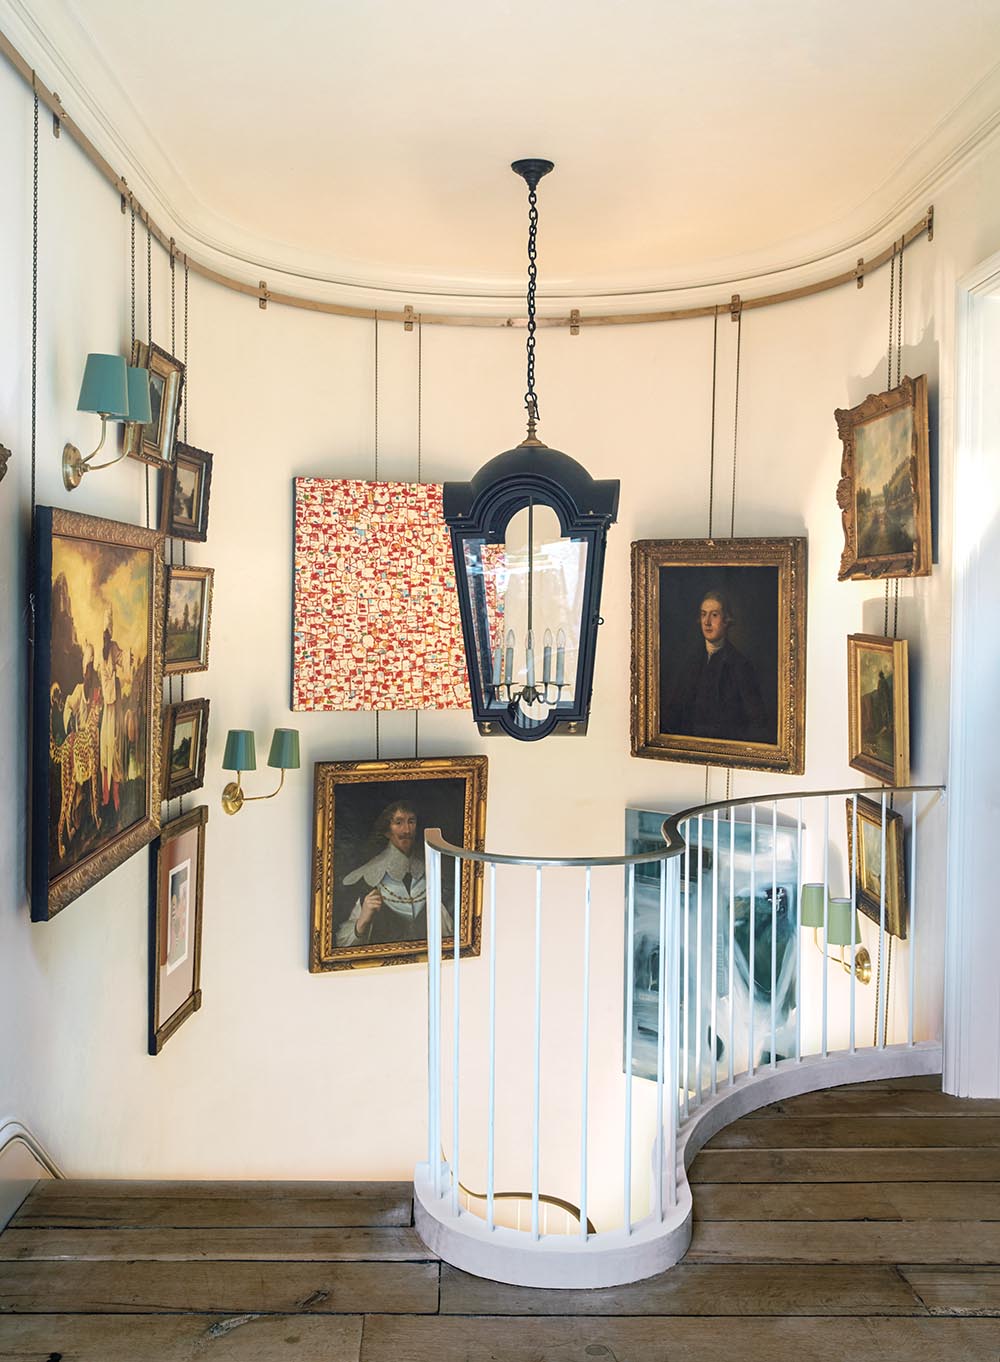 Large lantern hanging above stairs at second-story landing. Brass rail system holds paintings hung in stairwell.